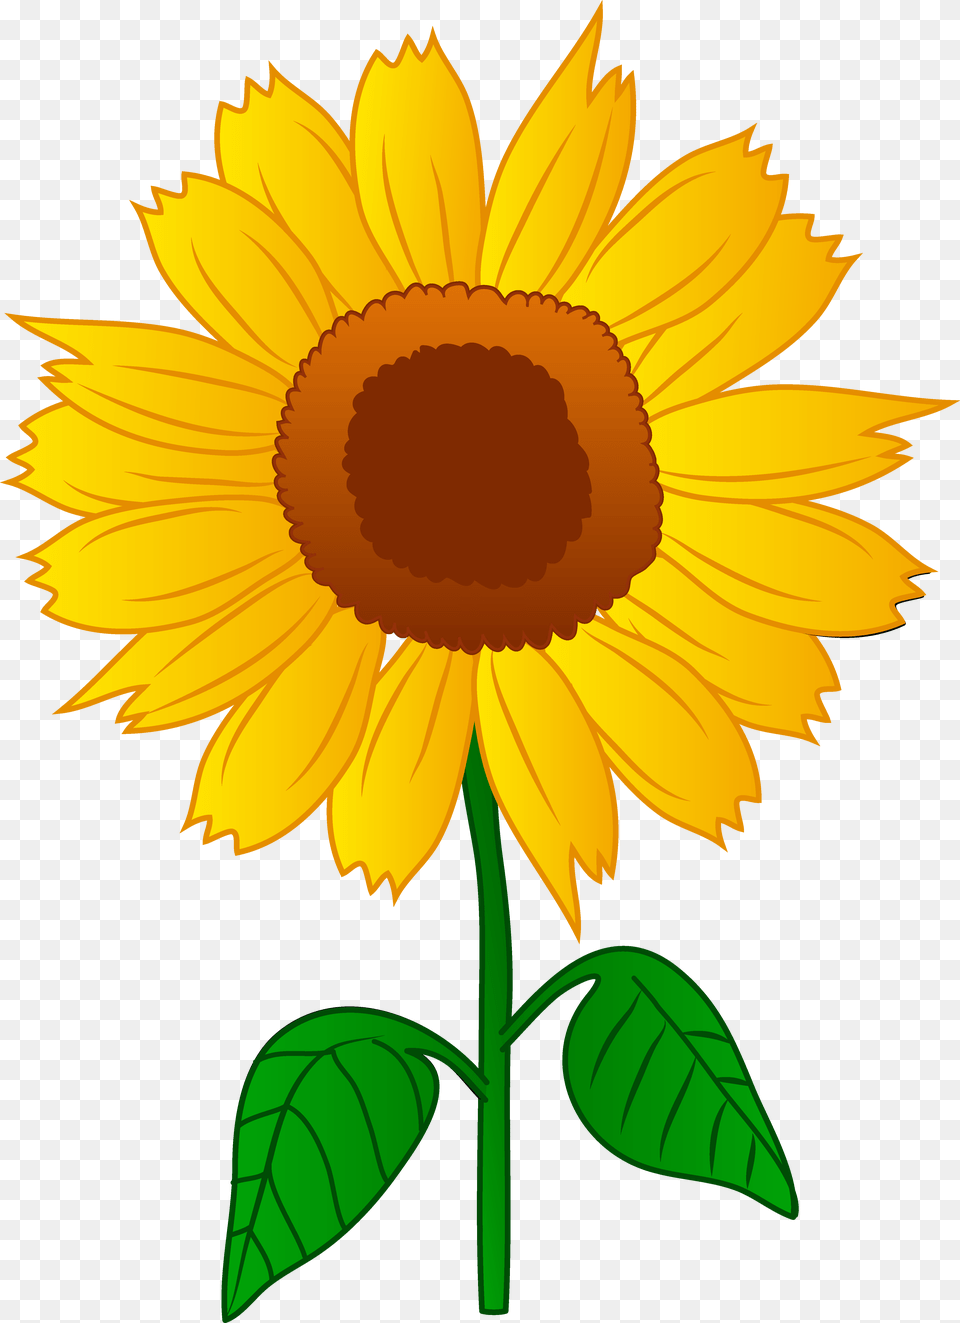 Sunflower Clipart Transparent Clipart Image Of Sunflower, Flower, Plant, Daisy Free Png Download